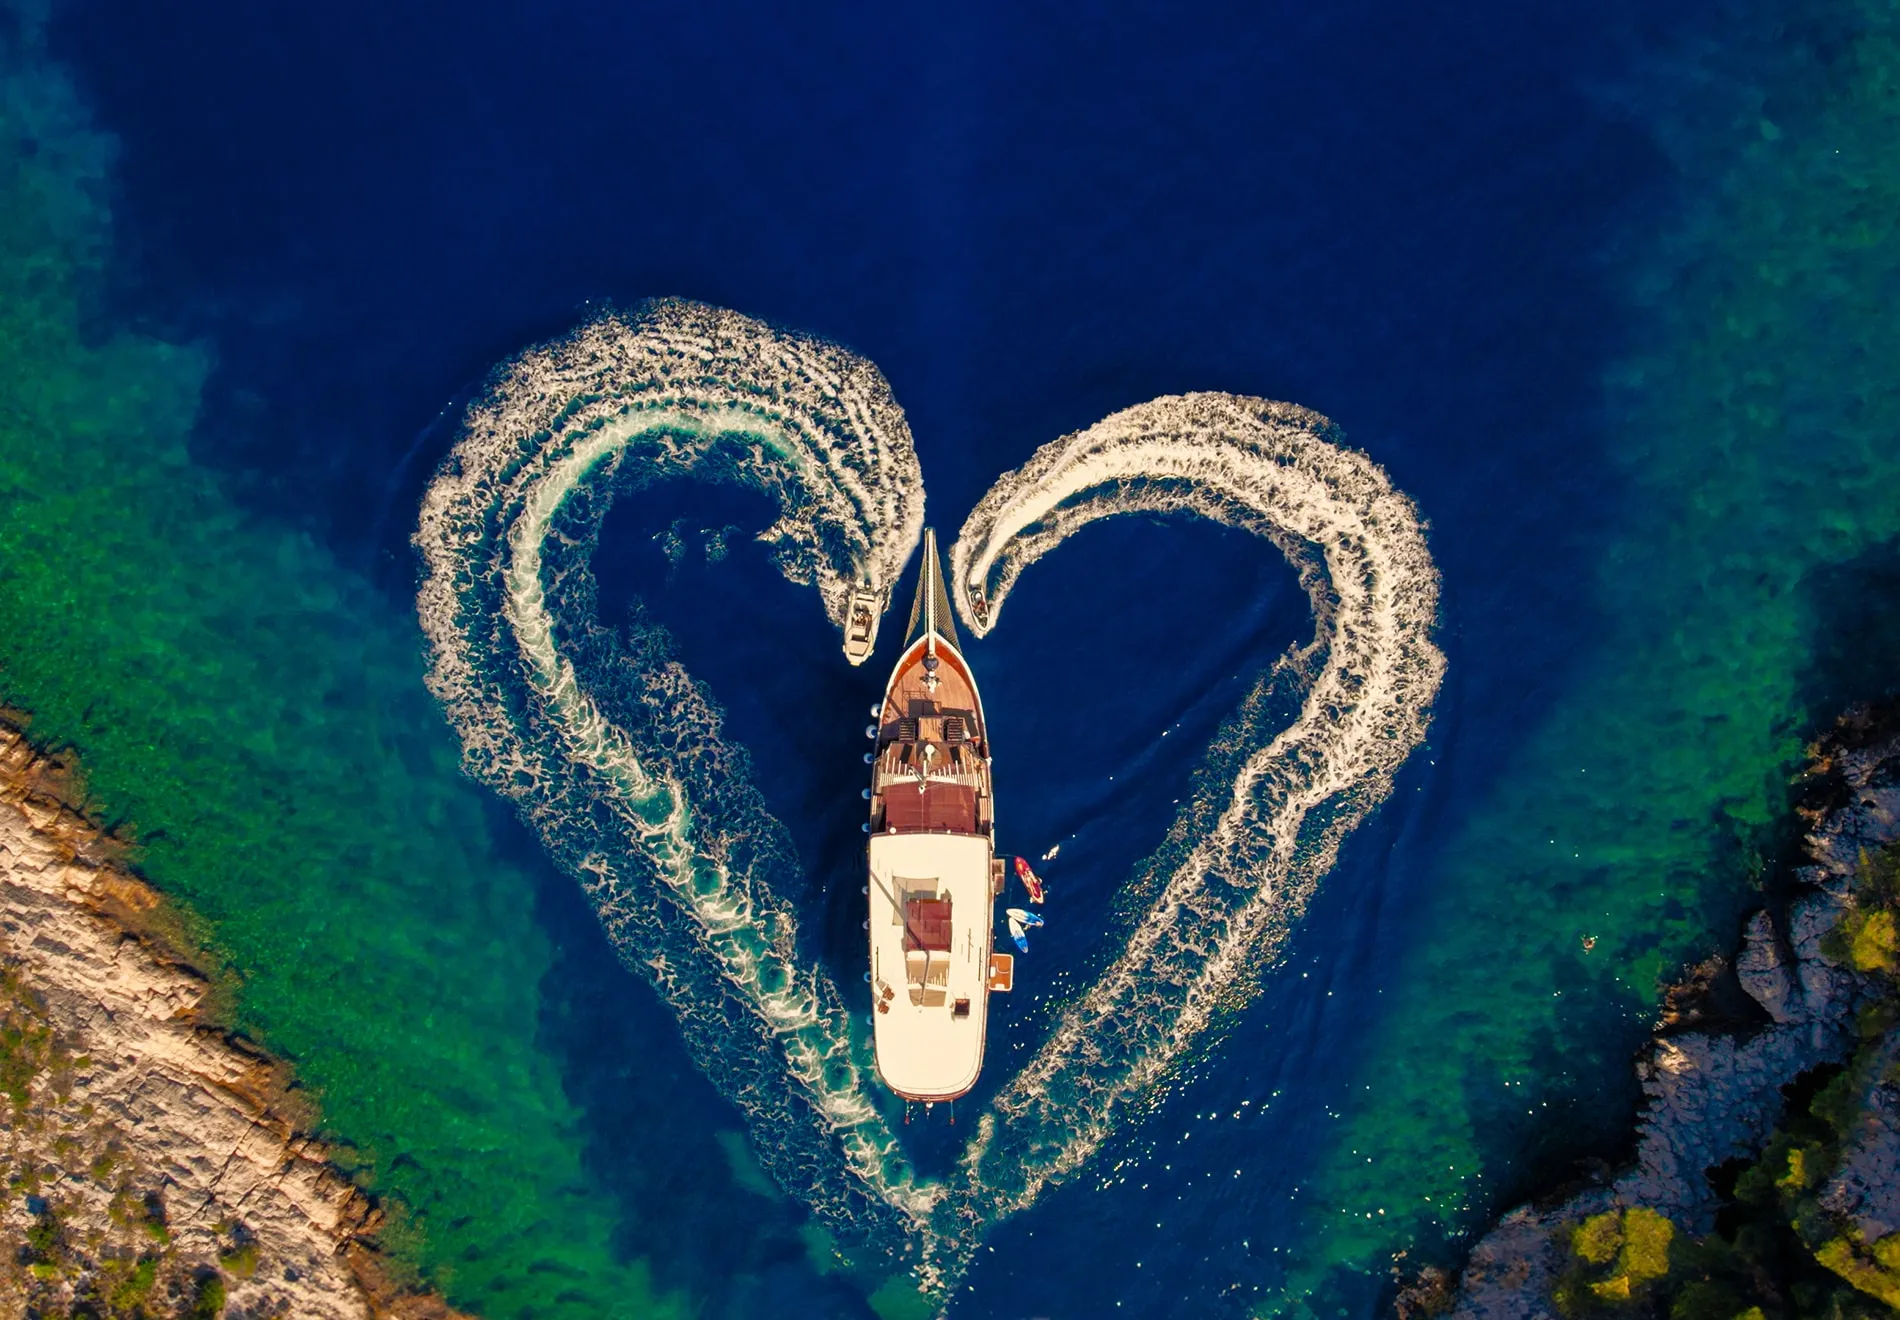 Which are the most must-visit places in Croatia during a yacht charter